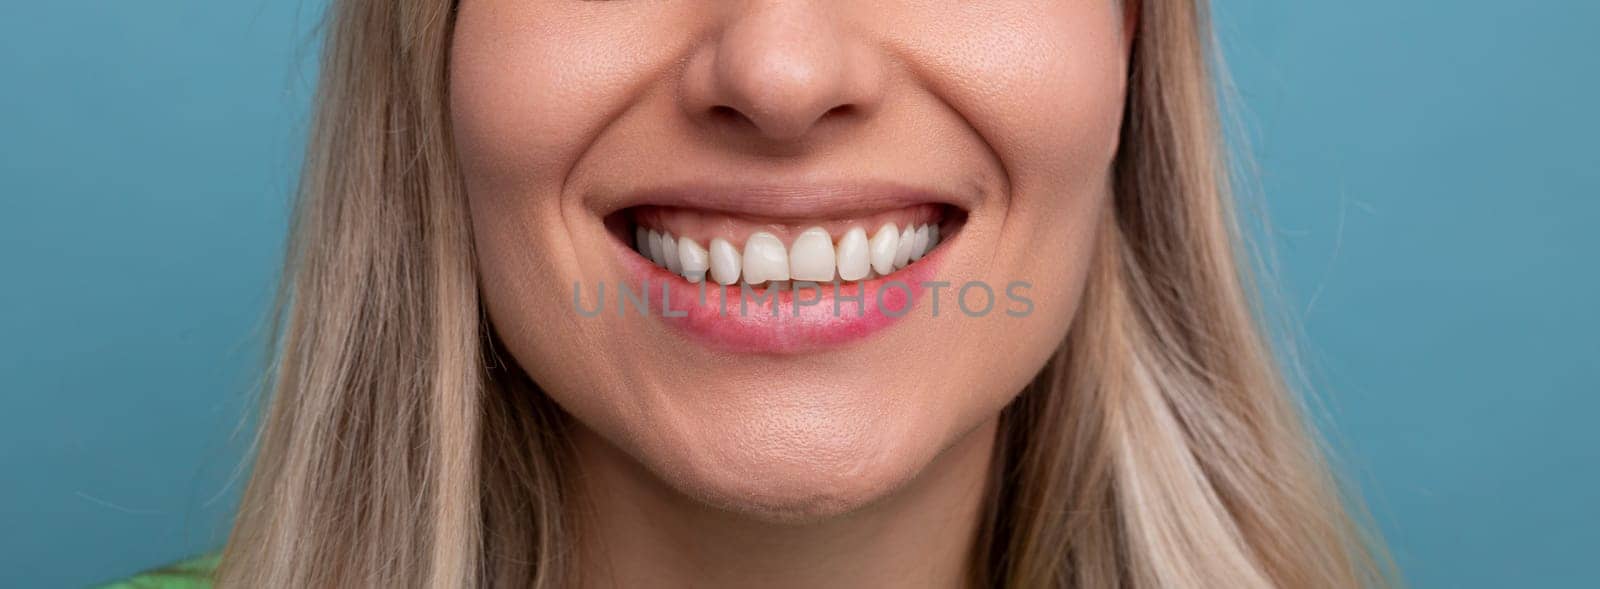 close-up of a female snow-white Hollywood smile on a blue background.